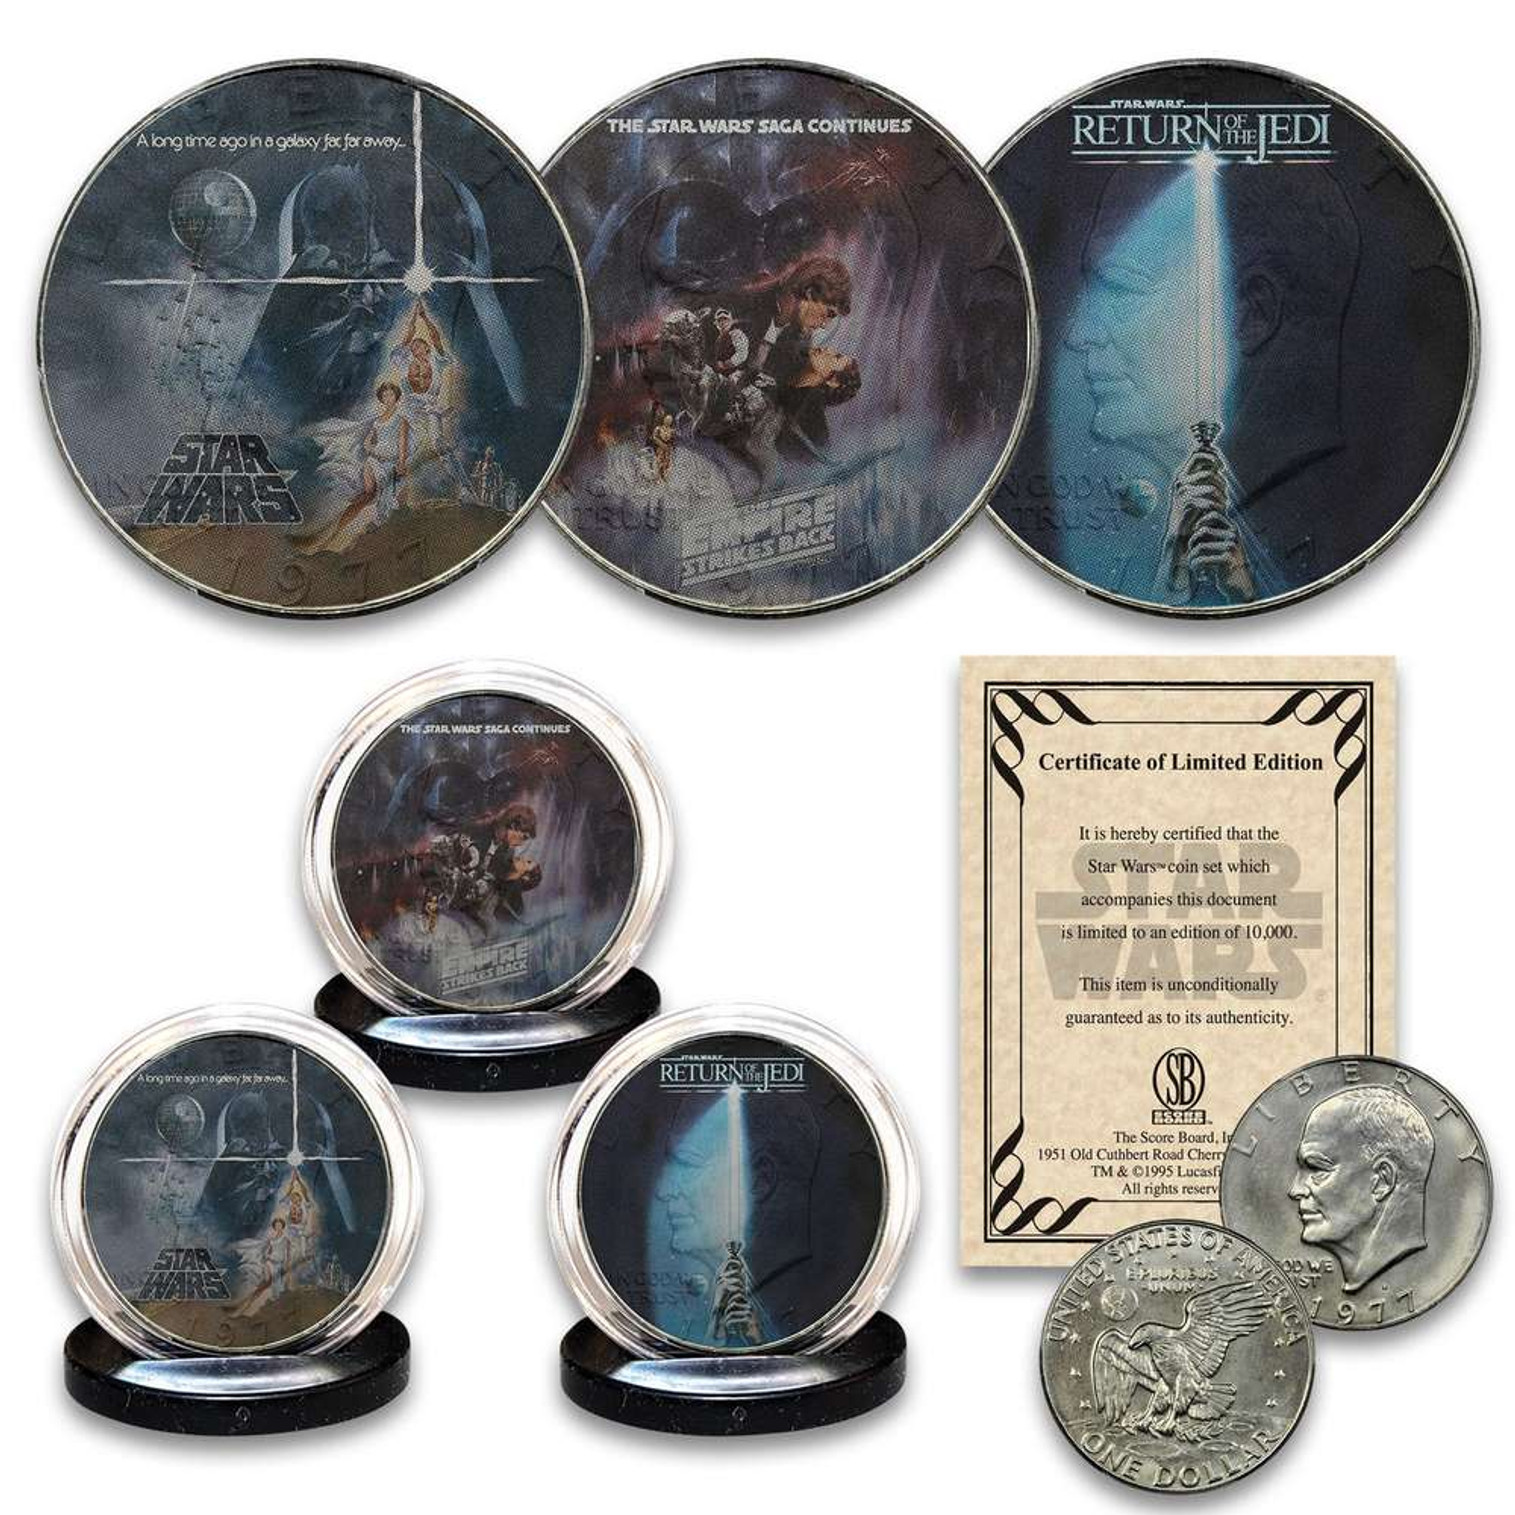 Star Wars Empire Strikes Back And Return Of Jedi Coin Set